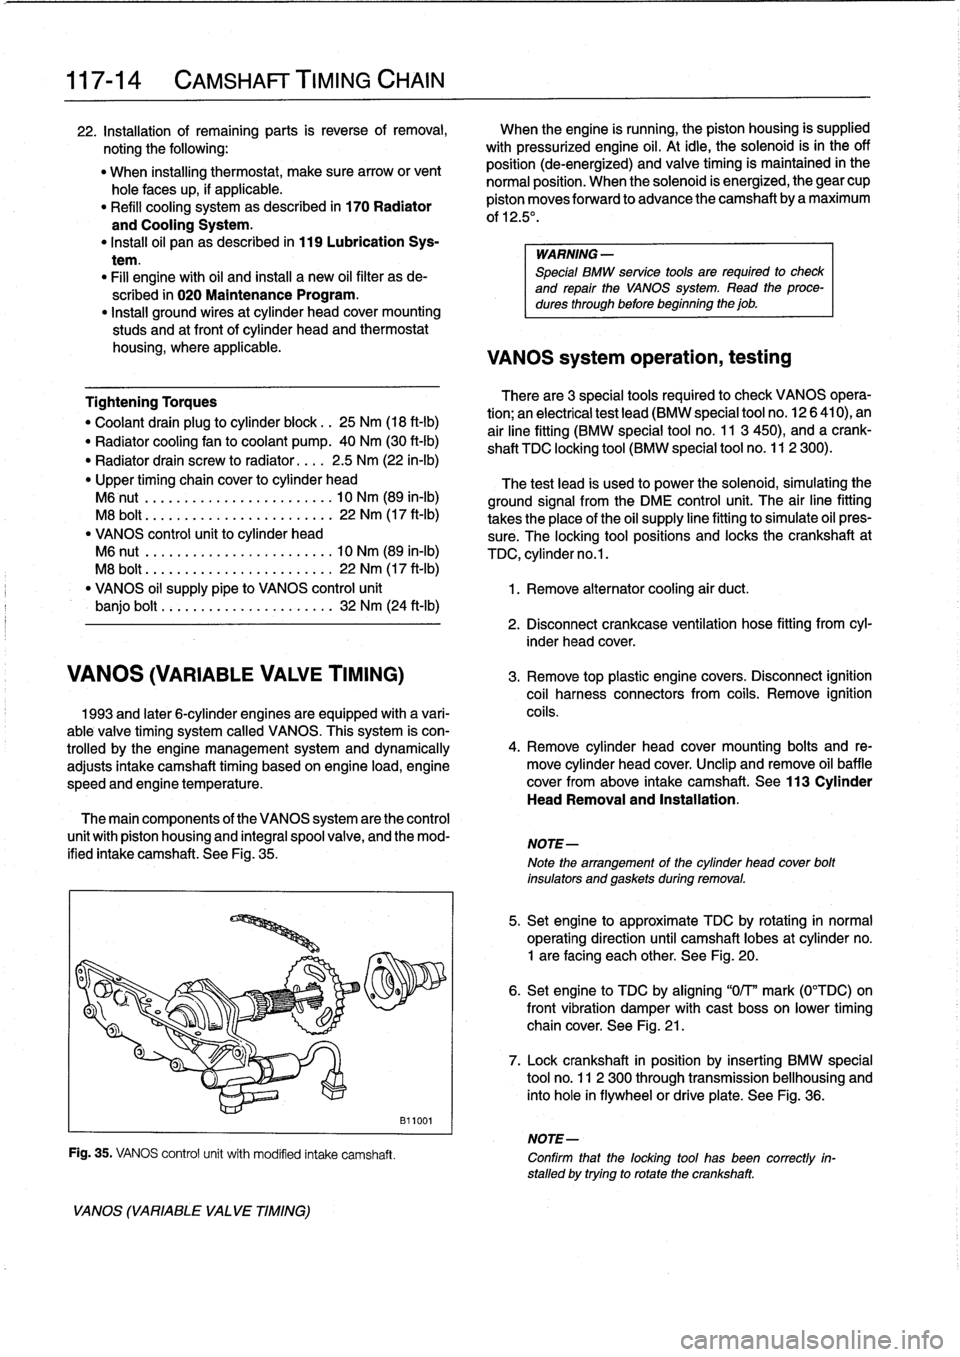 BMW 318i 1997 E36 Workshop Manual 
117-
1
4

	

CAMSHAFT
TIMING
CHAIN

22
.
Installation
of
remaining
parts
is
reverse
of
removal,

	

When
theengine
is
running,
the
piston
housing
is
supplied

noting
the
following
:

	

with
pressuri